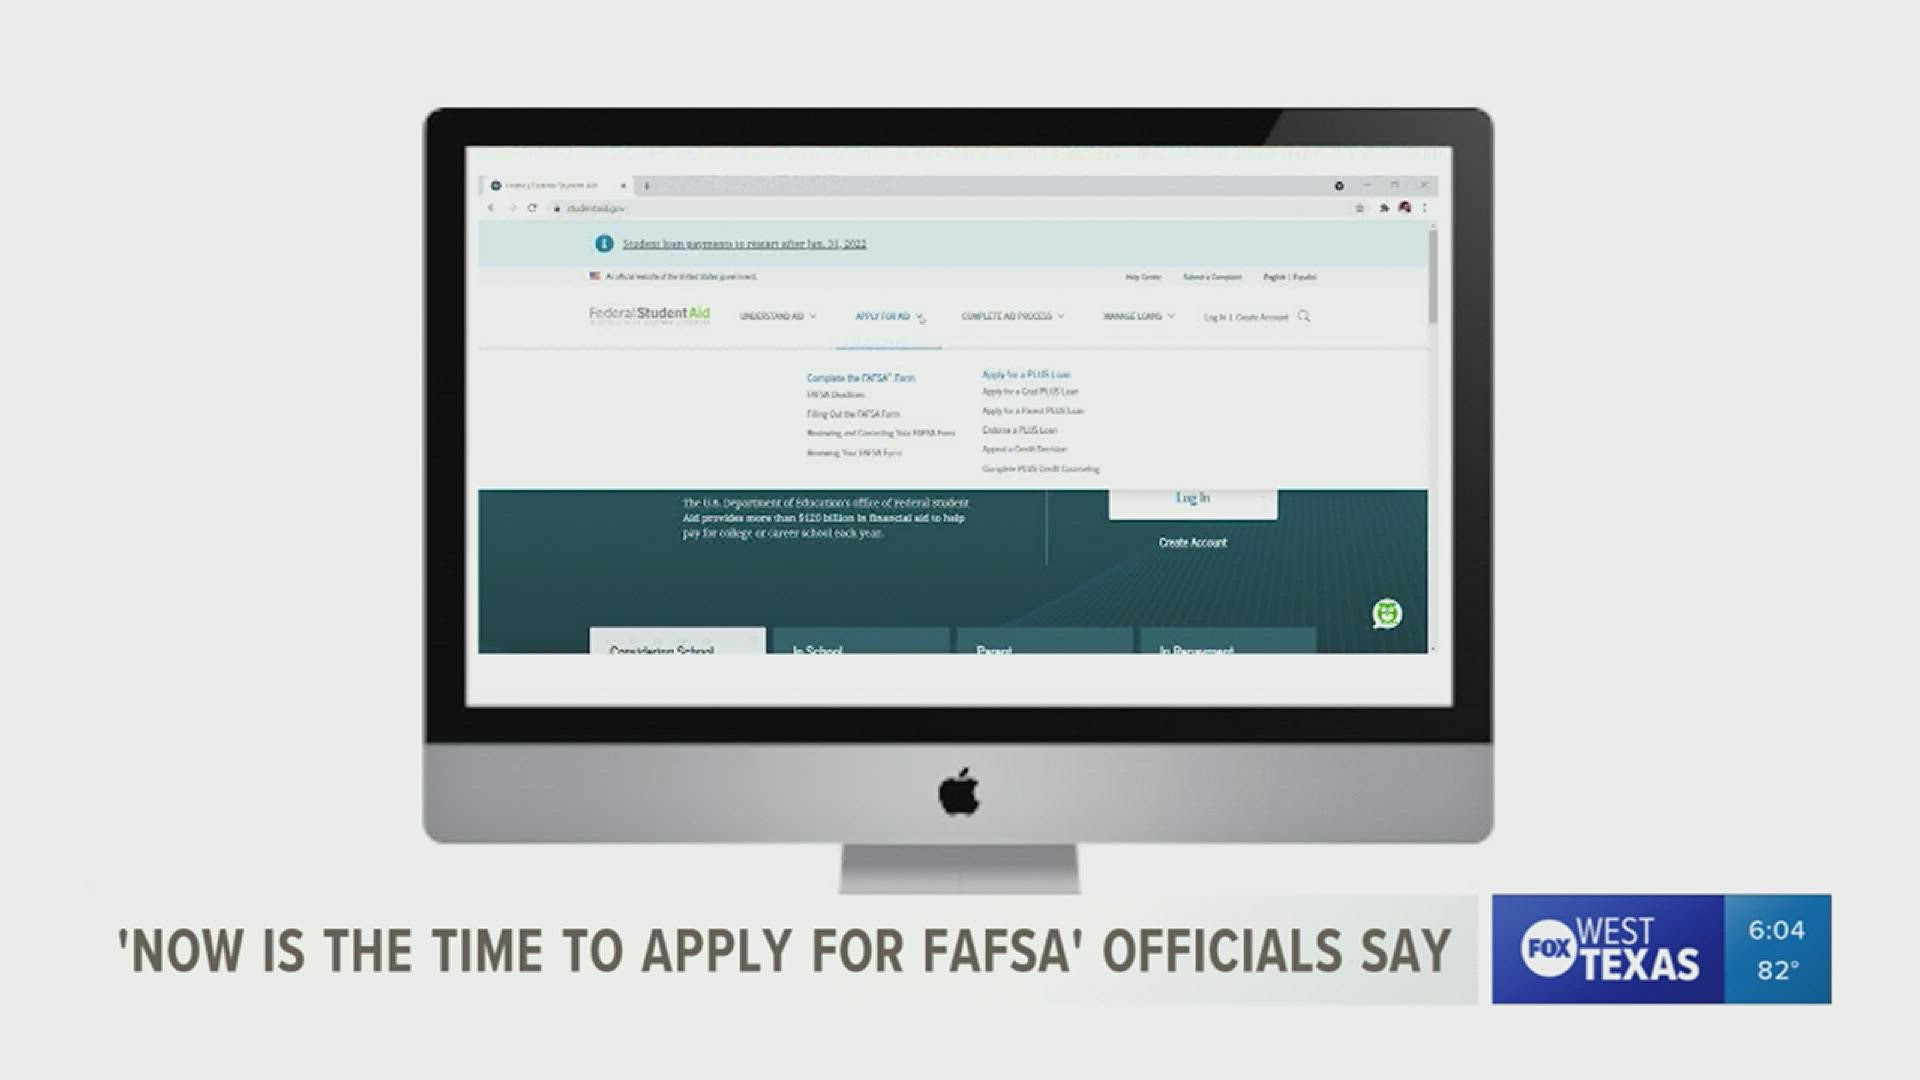 Oct. 1 was the first day to complete federal student aid applications nationwide.